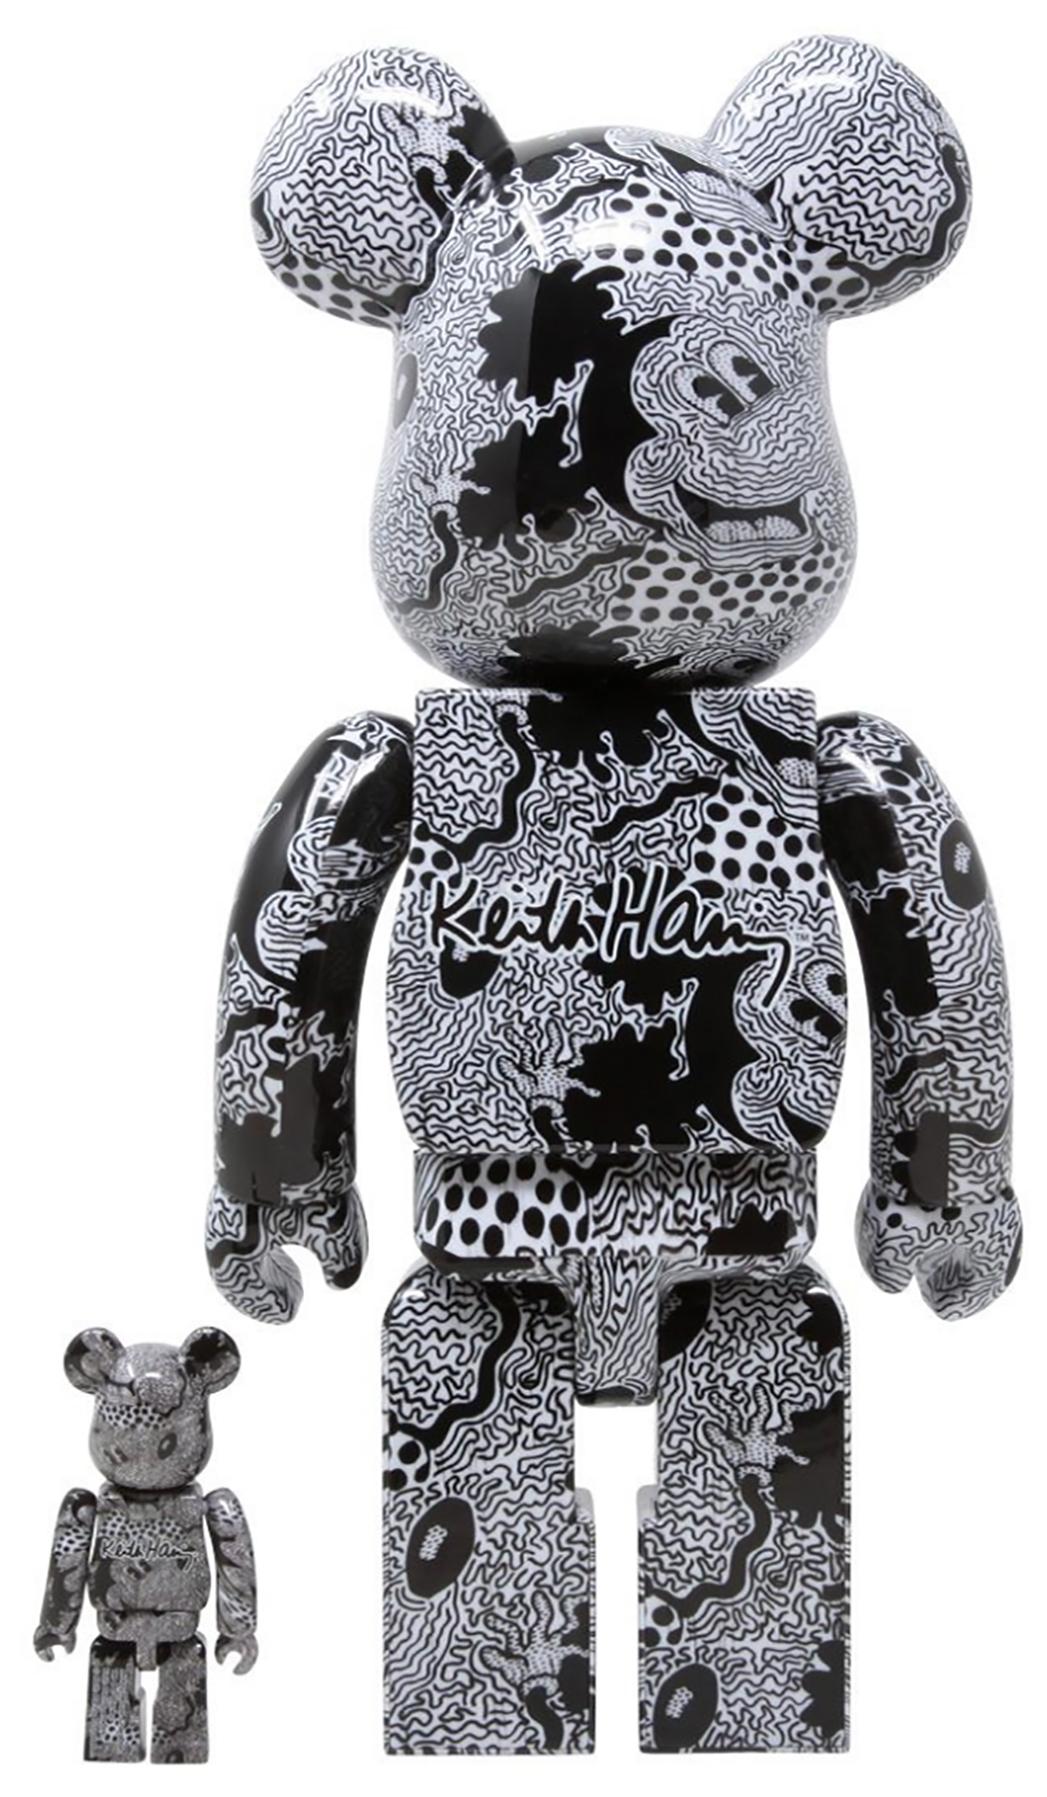 Keith Haring Bearbrick 400% companion (Haring Mickey Mouse BE@RBRICK) - Sculpture by (after) Keith Haring